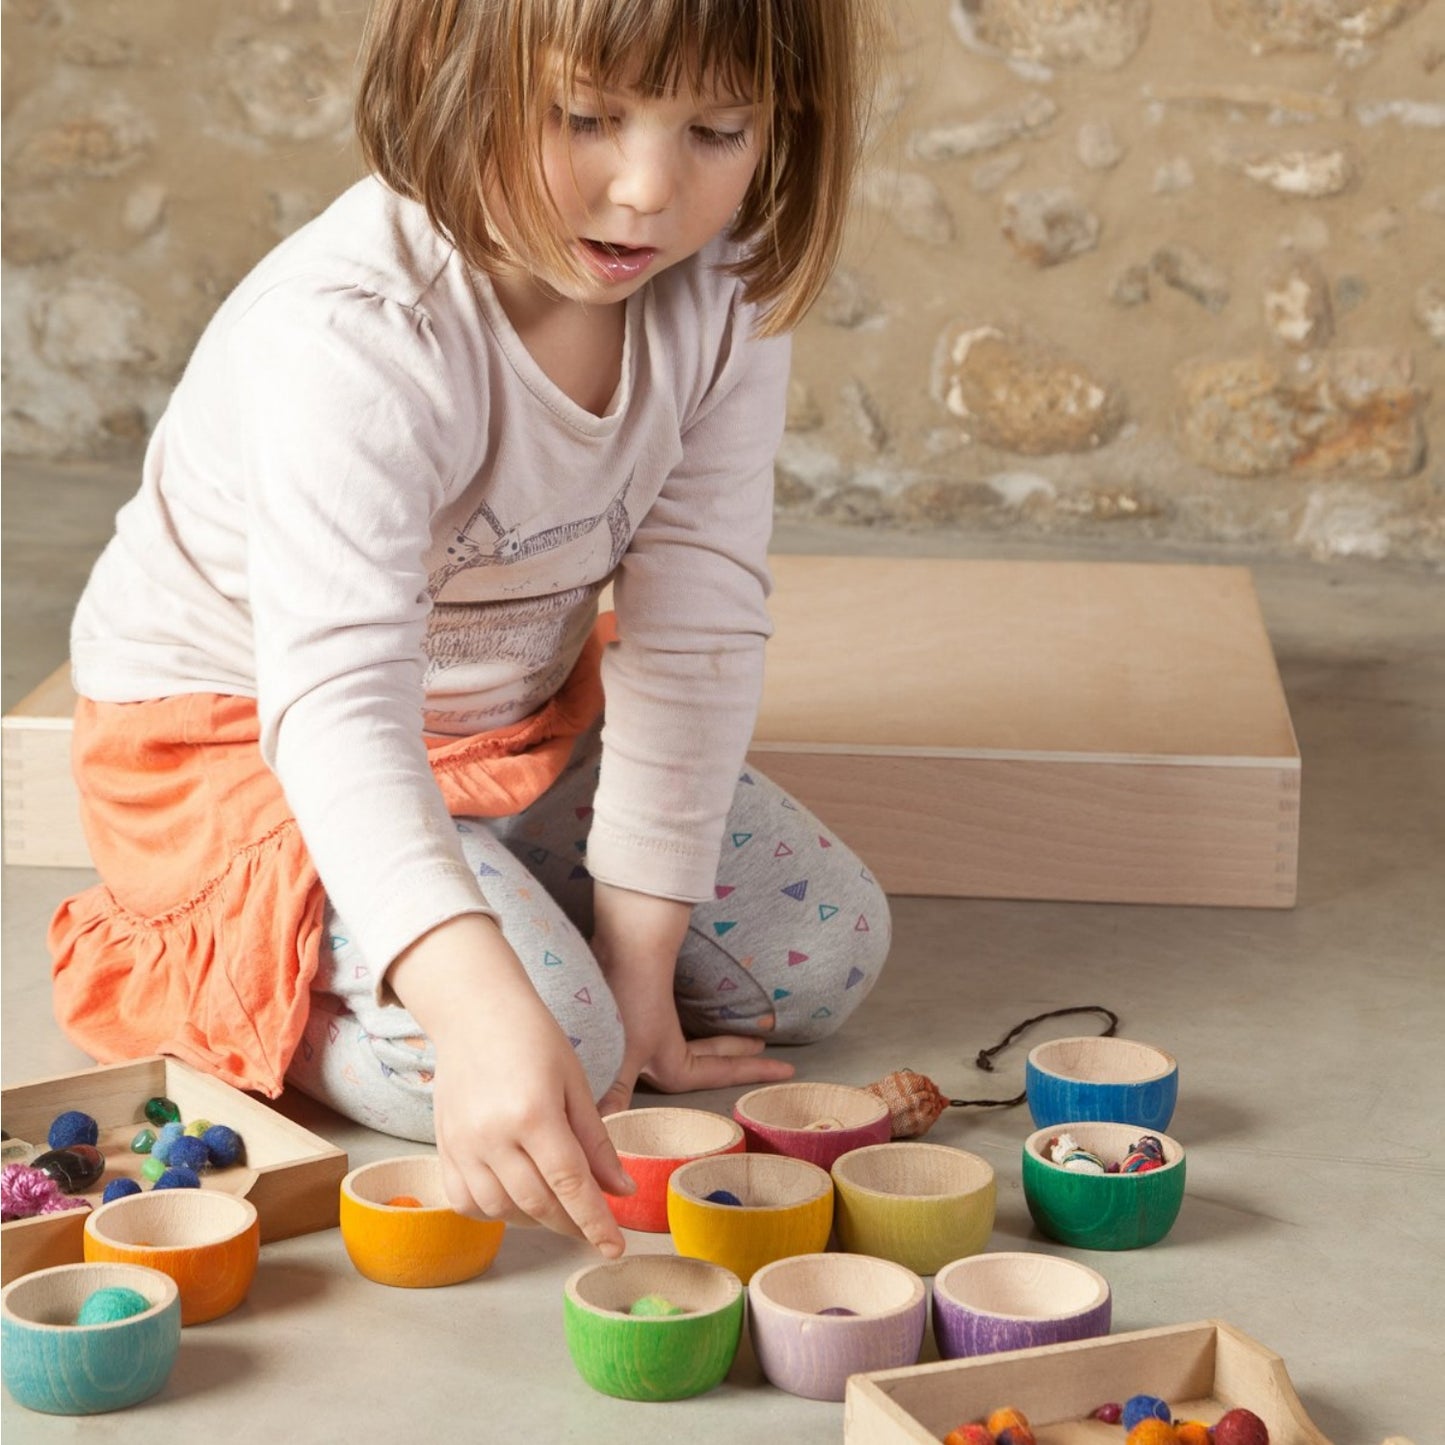 Grapat 12 Bowls | Wooden Toys for Kids | Open-Ended Play Set | Lifestyle: Girl Playing with Bowls | BeoVERDE.ie